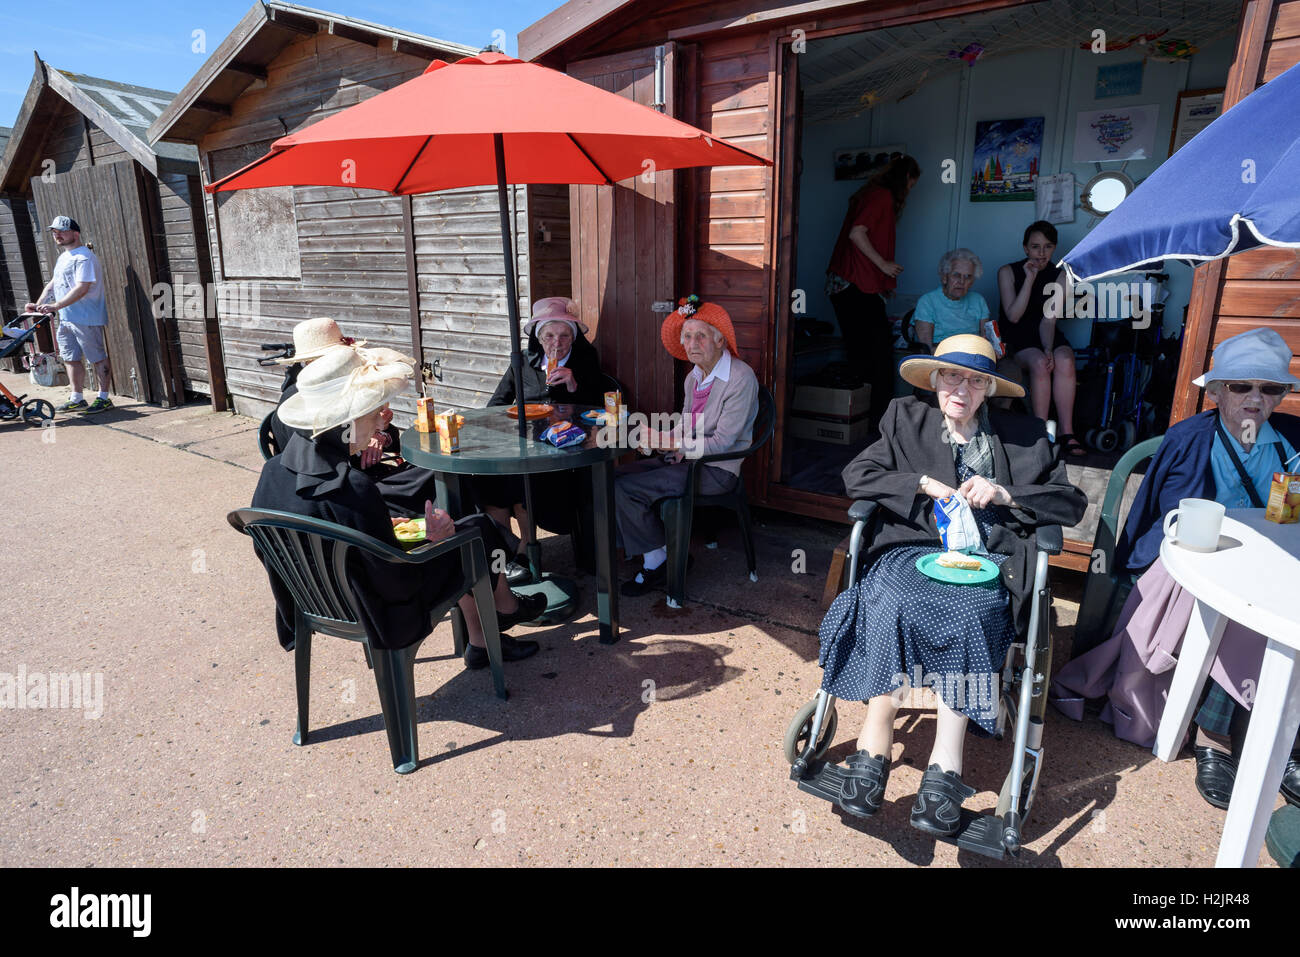 Group of elderly people sitting outside a wooden painted beach hut drinking orange juice during the summer of 2016 Stock Photo